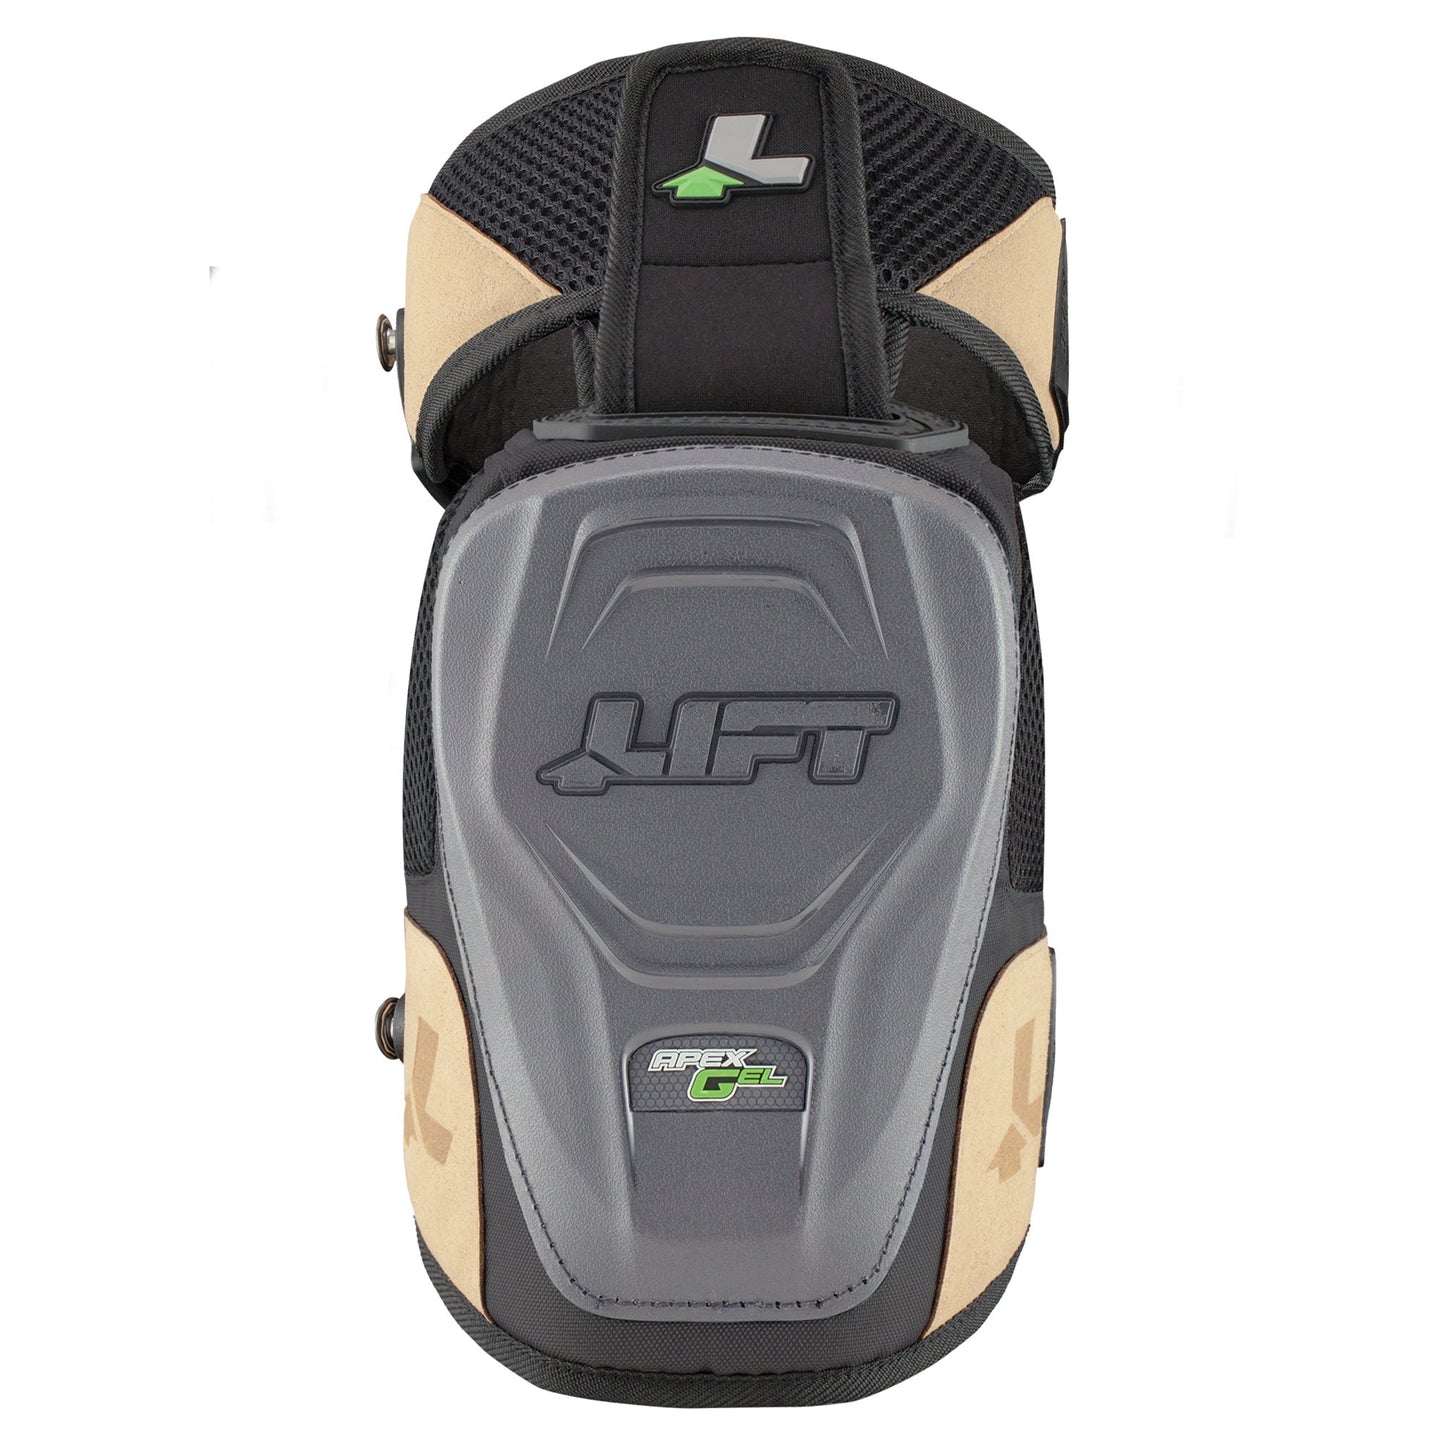 LIFT Safety - APEX GEL Knee Guards - Non Marring